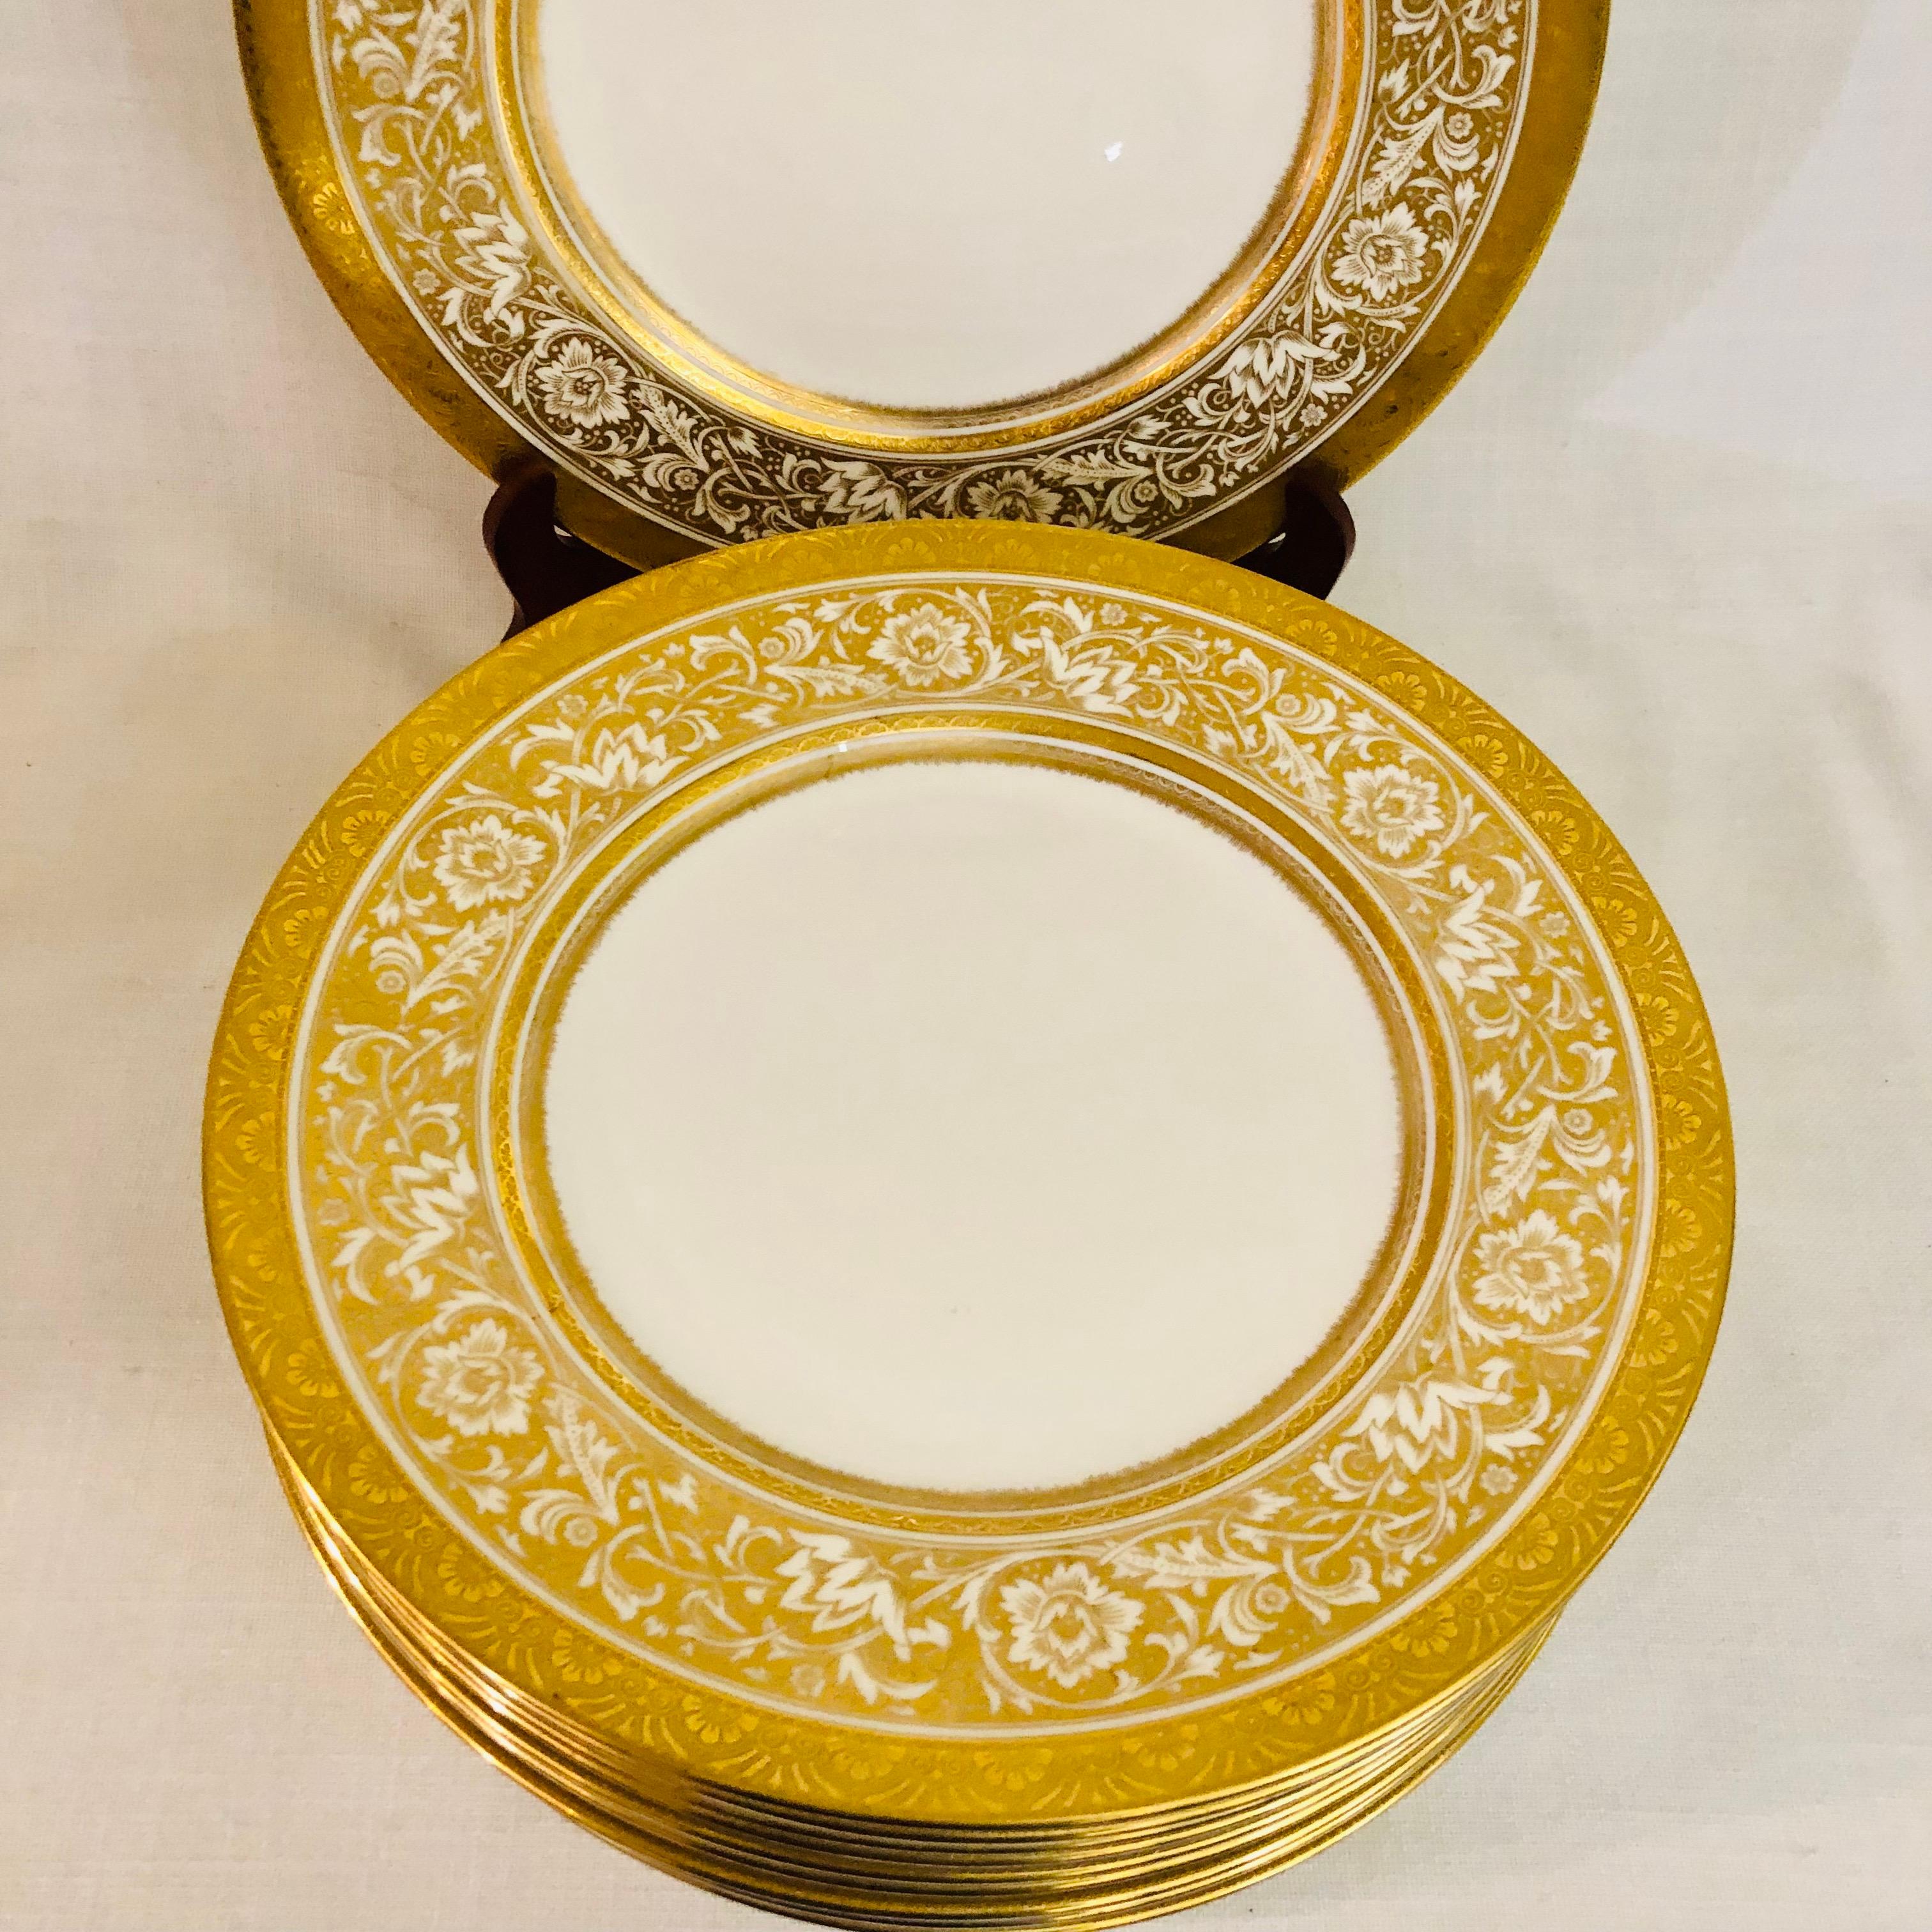 Rococo Set of Eleven Minton Porcelain Ball Dinner Plates Made for T. Goode LTD, London